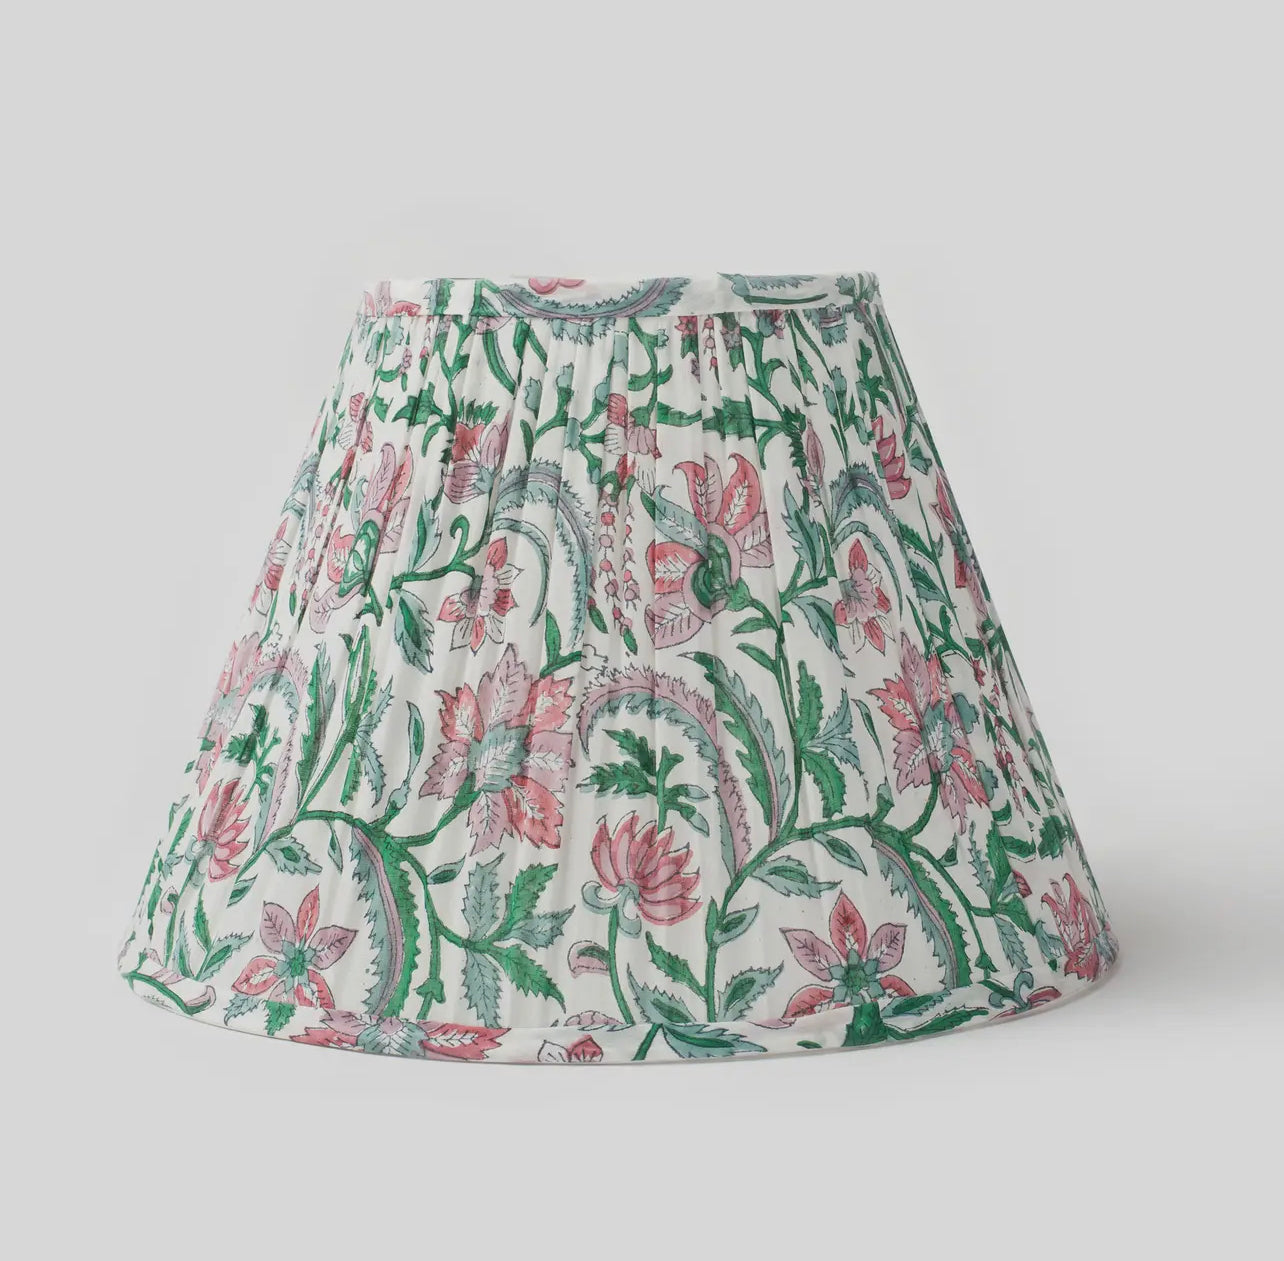 Gathered printed lampshades, pink and green floral